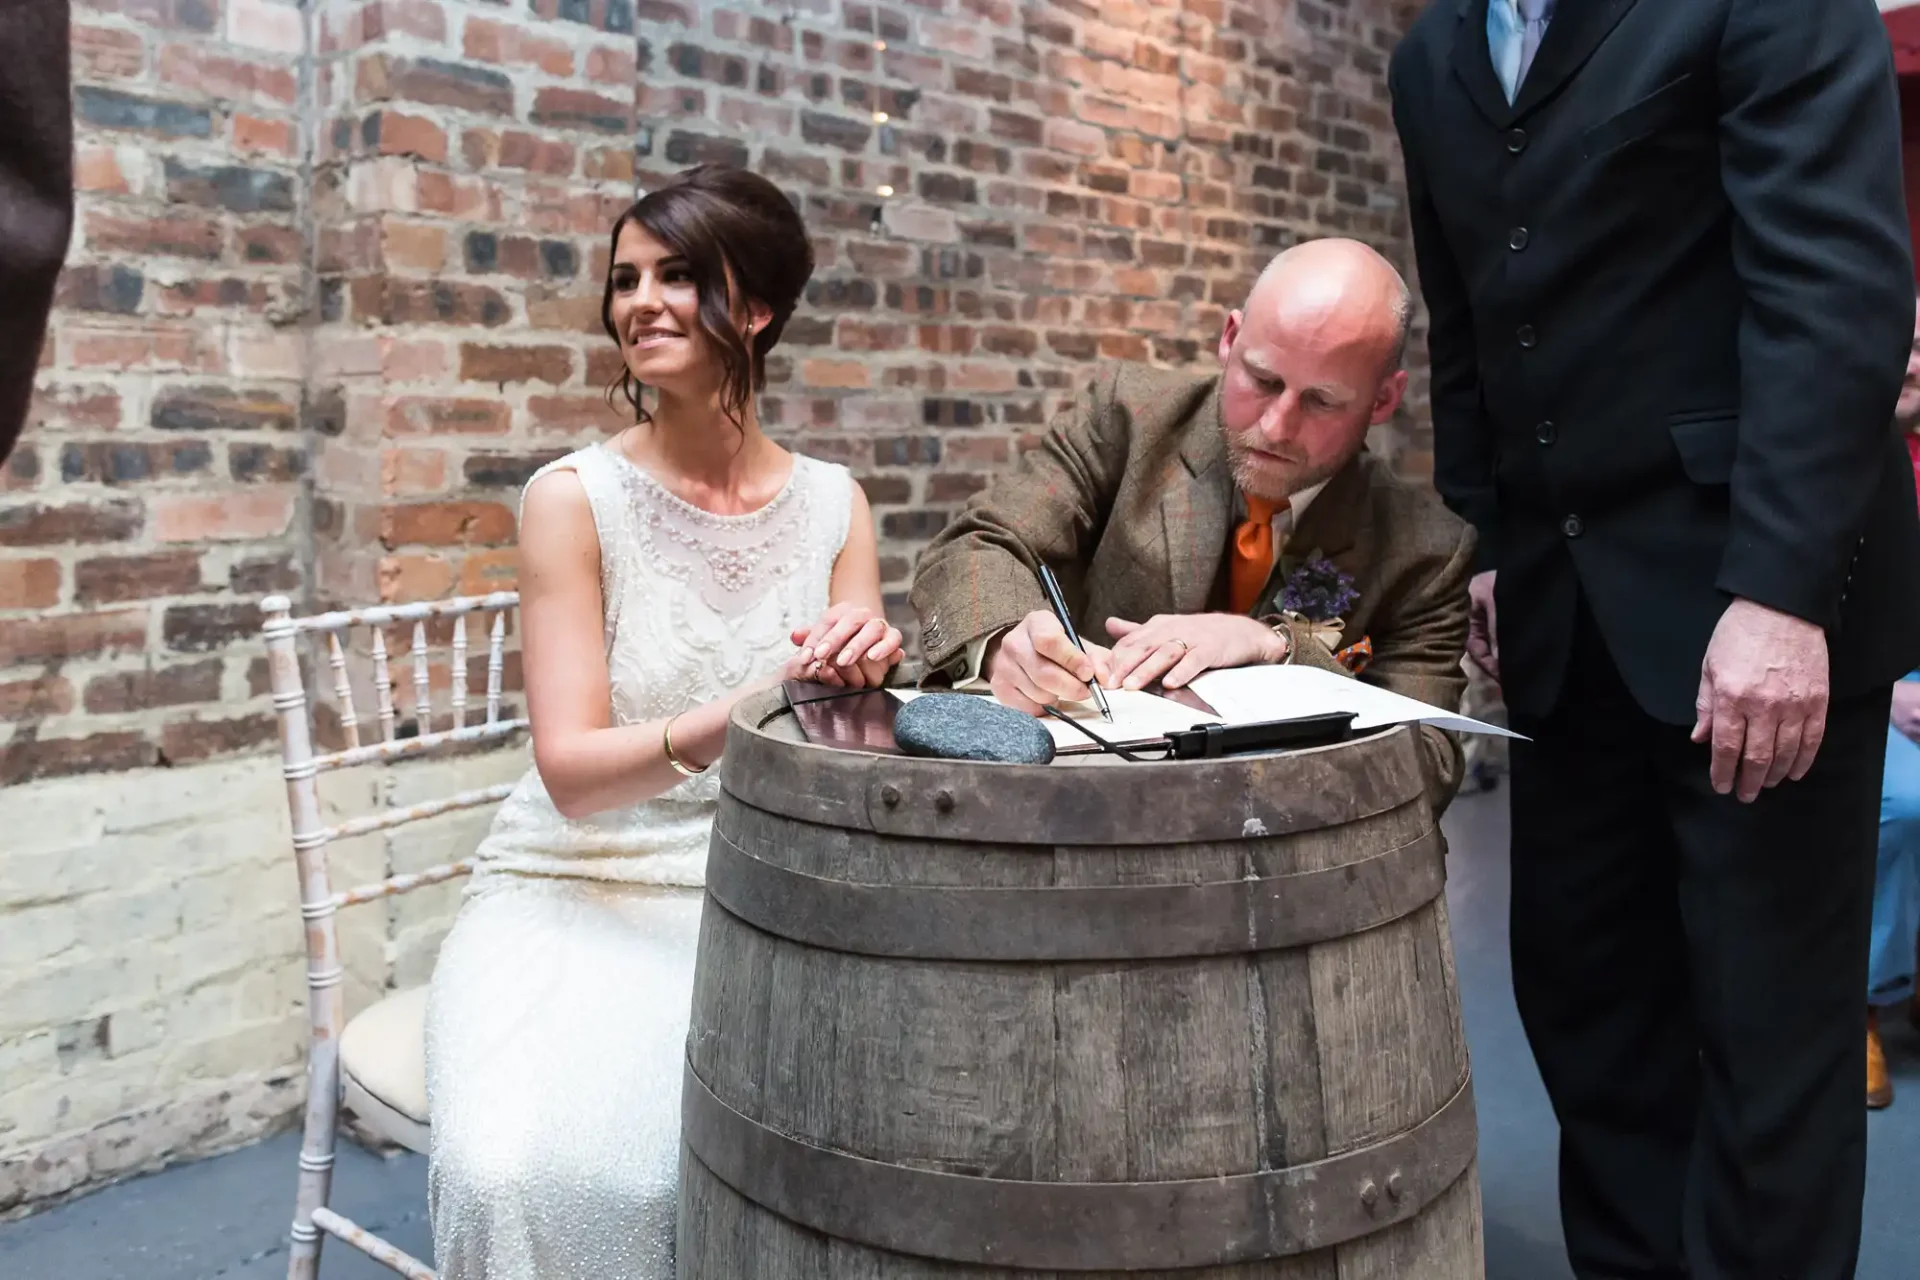 A bride and groom sign a document on a barrel in a rustic setting with brick walls, observing a wedding tradition.